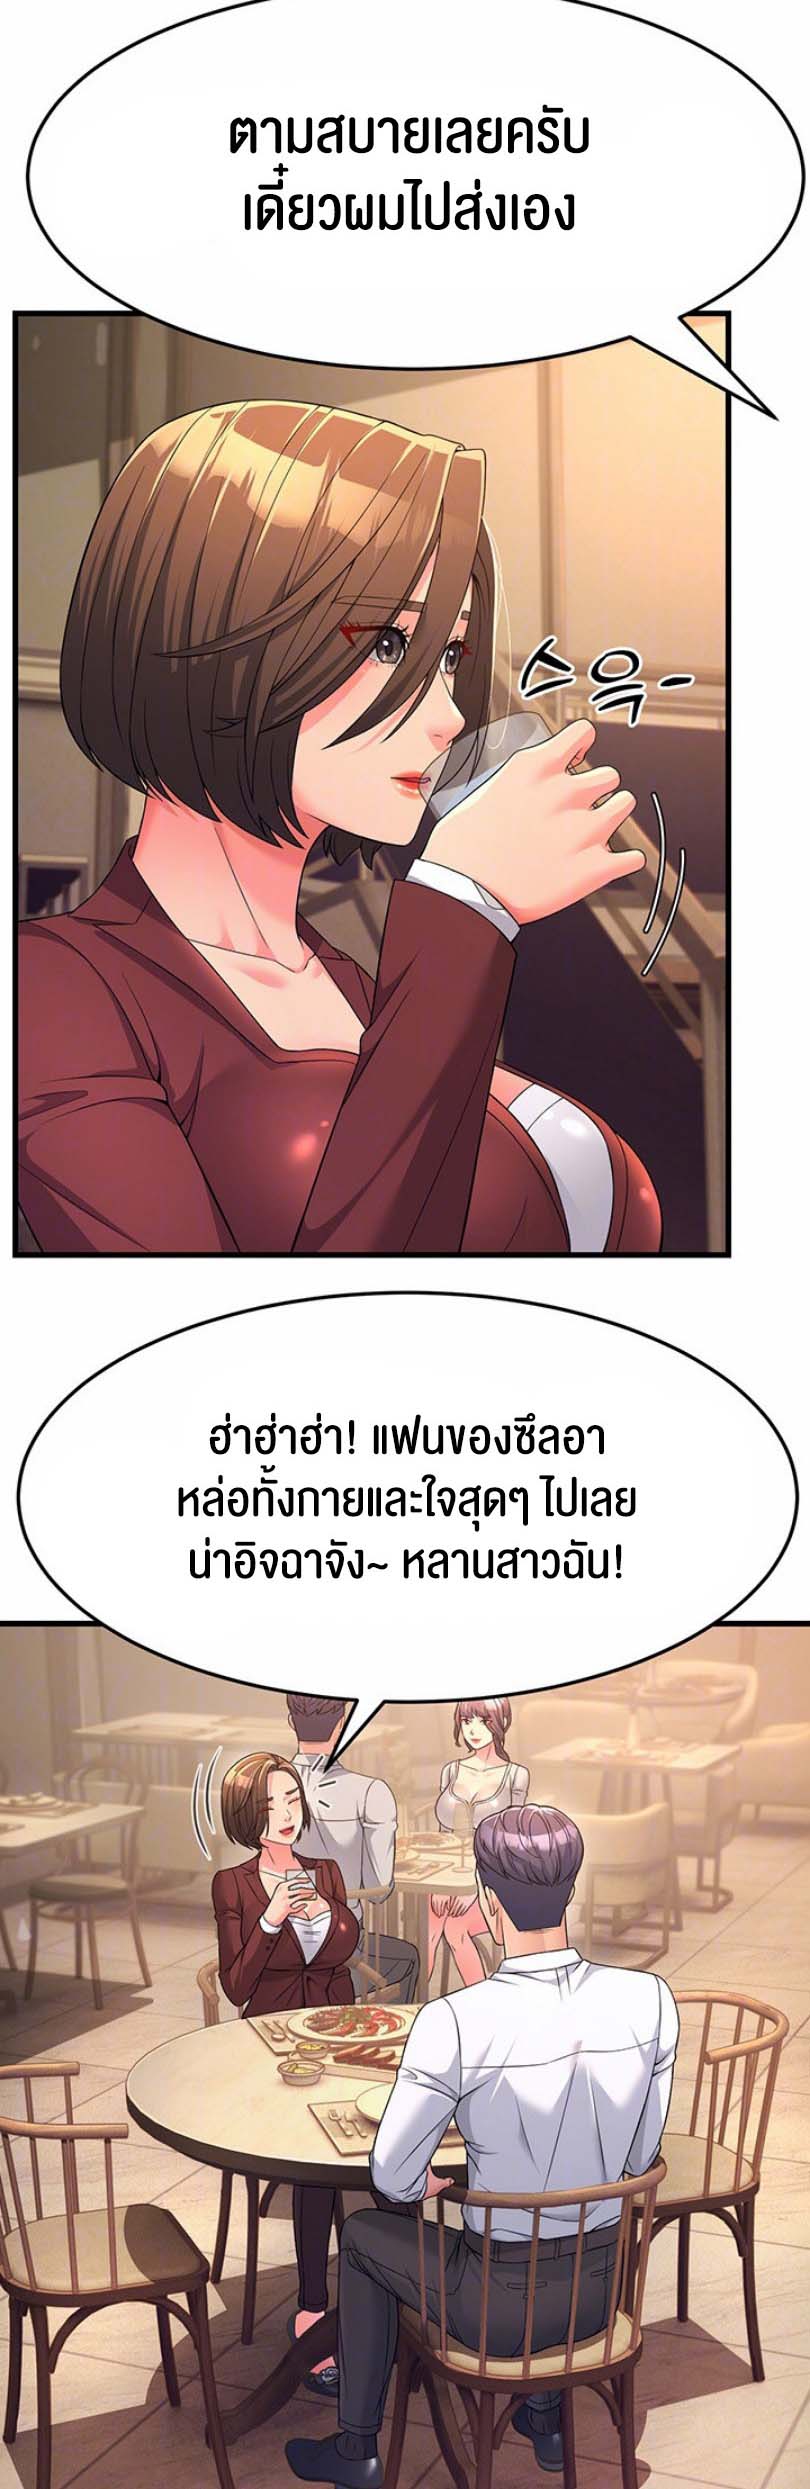 à¸­à¹ˆà¸²à¸™à¹‚à¸”à¸ˆà¸´à¸™ à¹€à¸£à¸·à¹ˆà¸­à¸‡ Mother in Law Bends To My Will 9 12